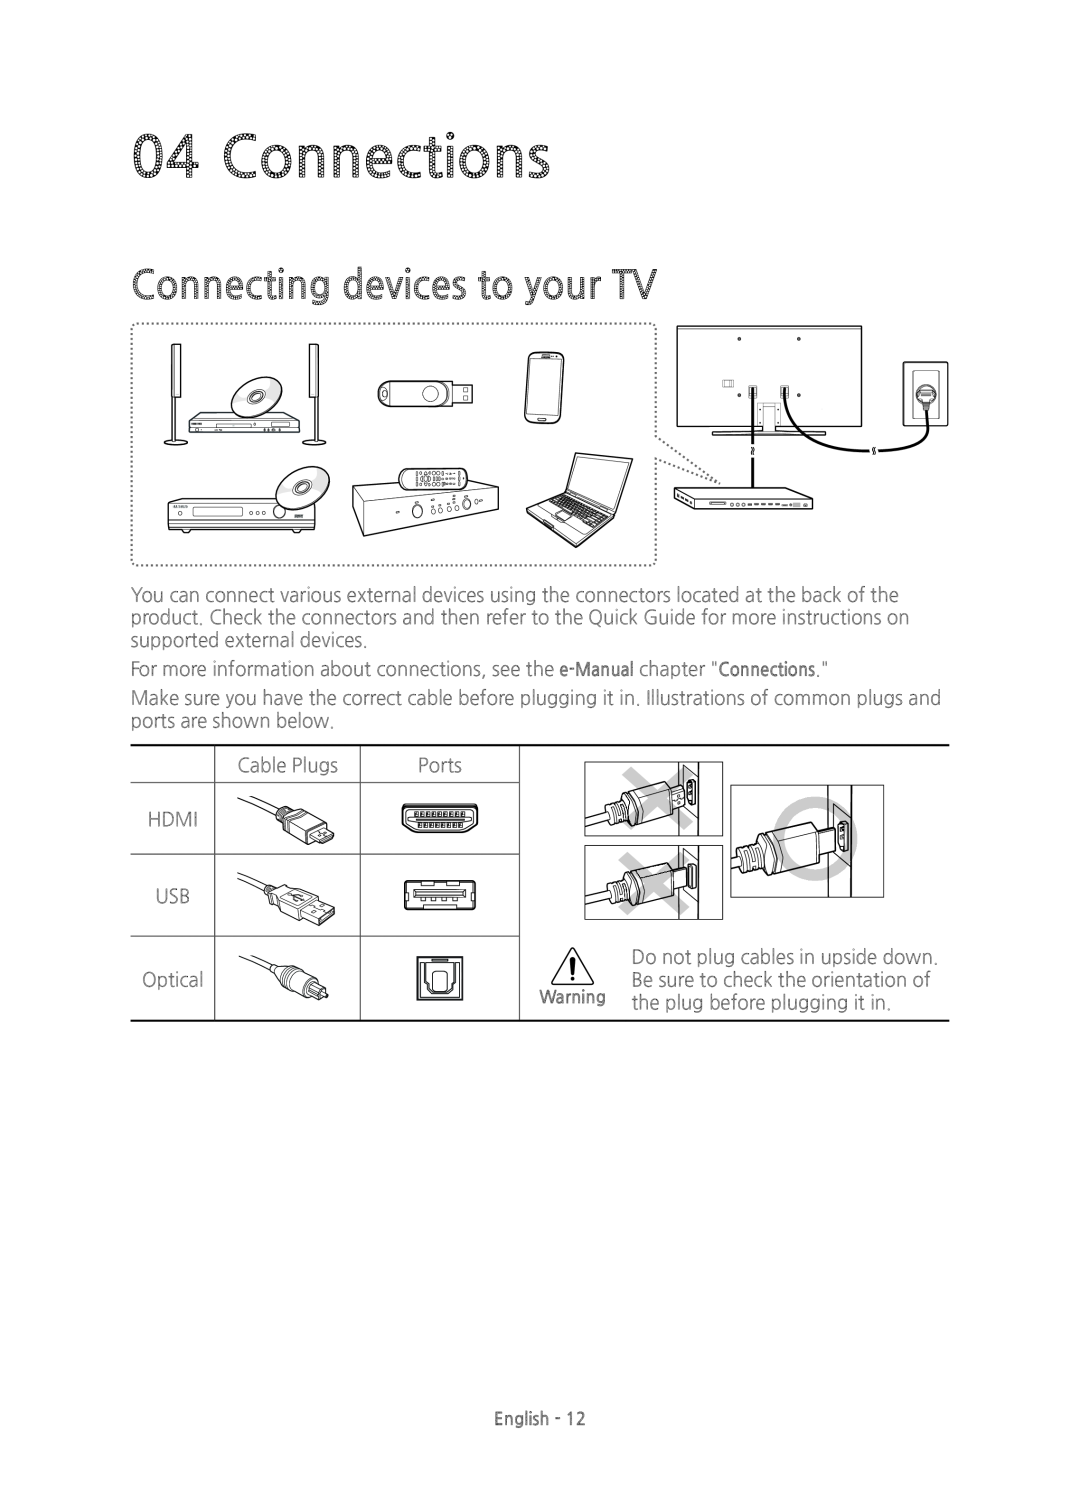 Samsung UE88JS9500TXZF, UE65JS9500TXZF, UE78JS9500TXZF, UE88JS9500TXZT manual Connections, Connecting devices to your TV 